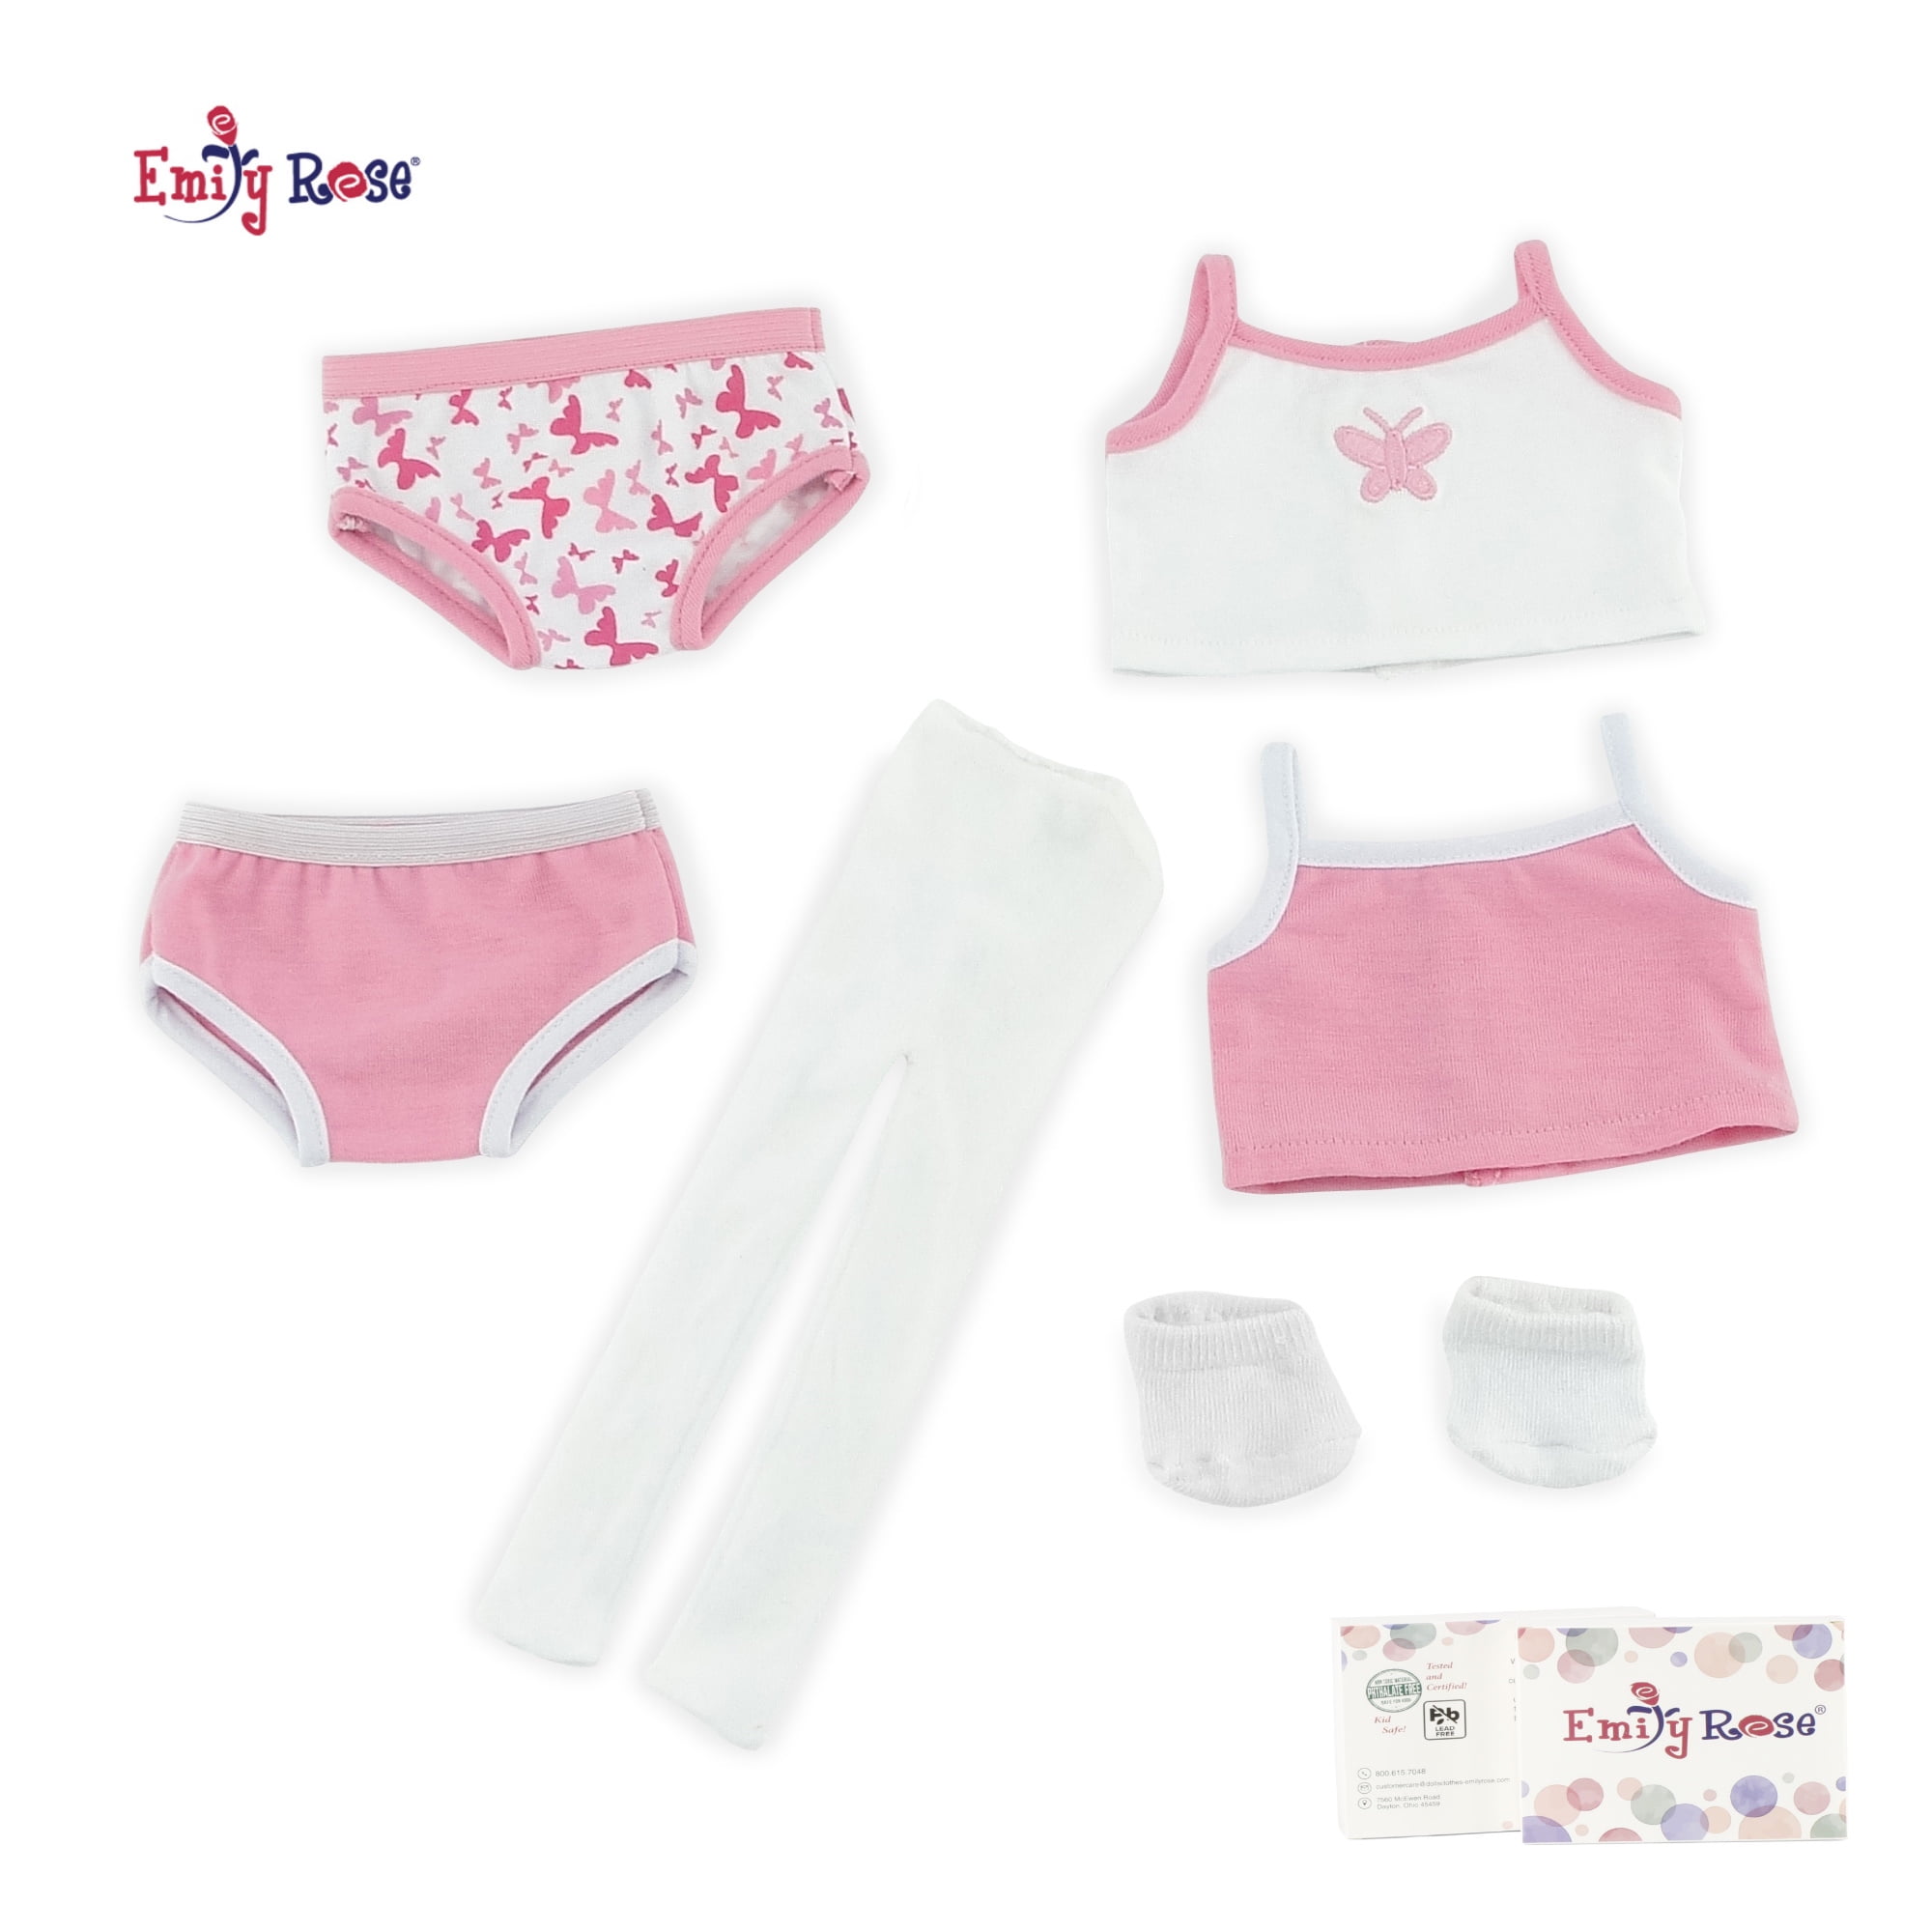 Emily Rose 18 inch Doll Clothes 18 inch Doll Value Pack Doll Underwear Set